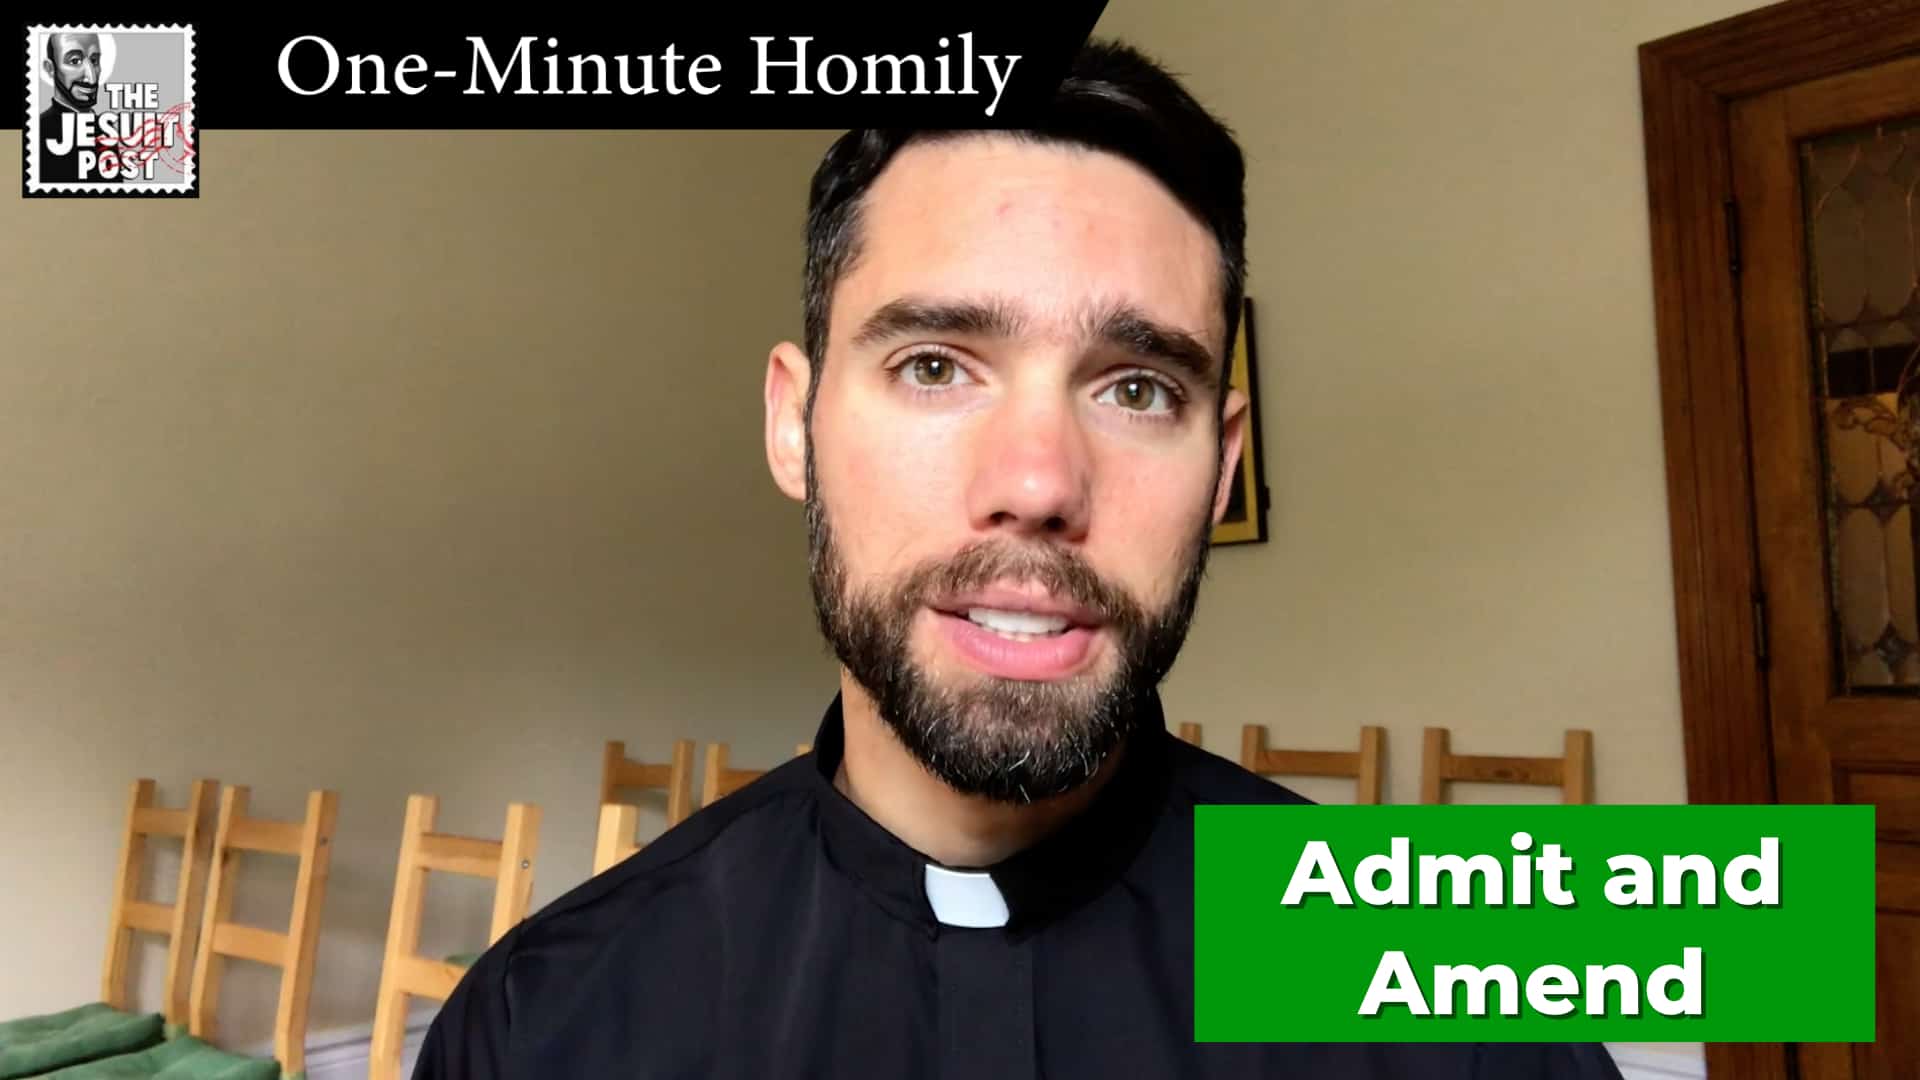 One-Minute Homily: “Admit and Amend”